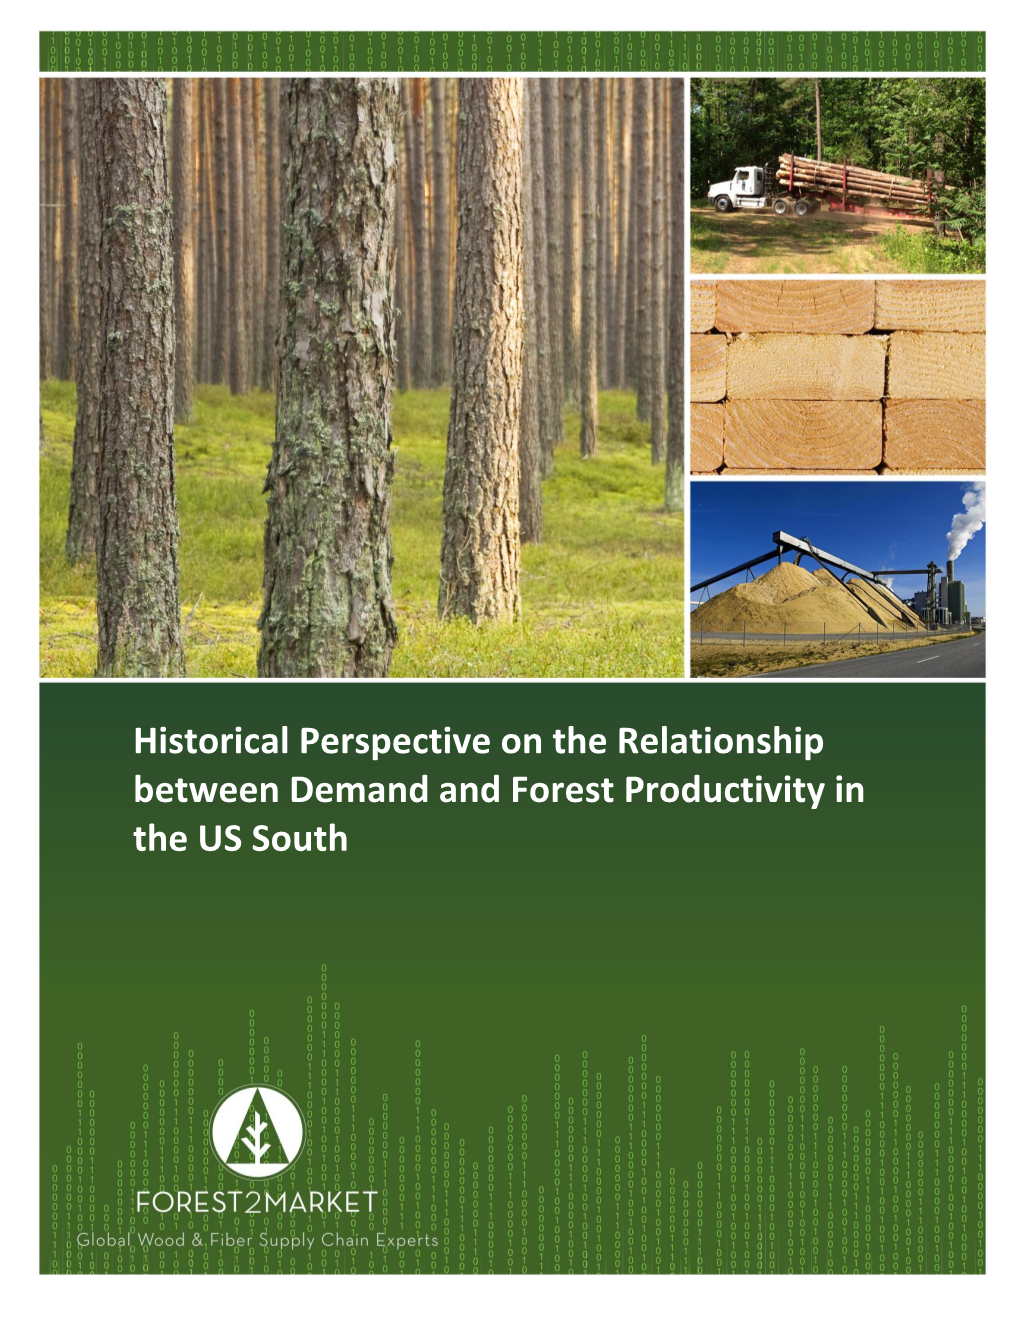 Historical Perspective on the Relationship Between Demand and Forest Productivity in the US South